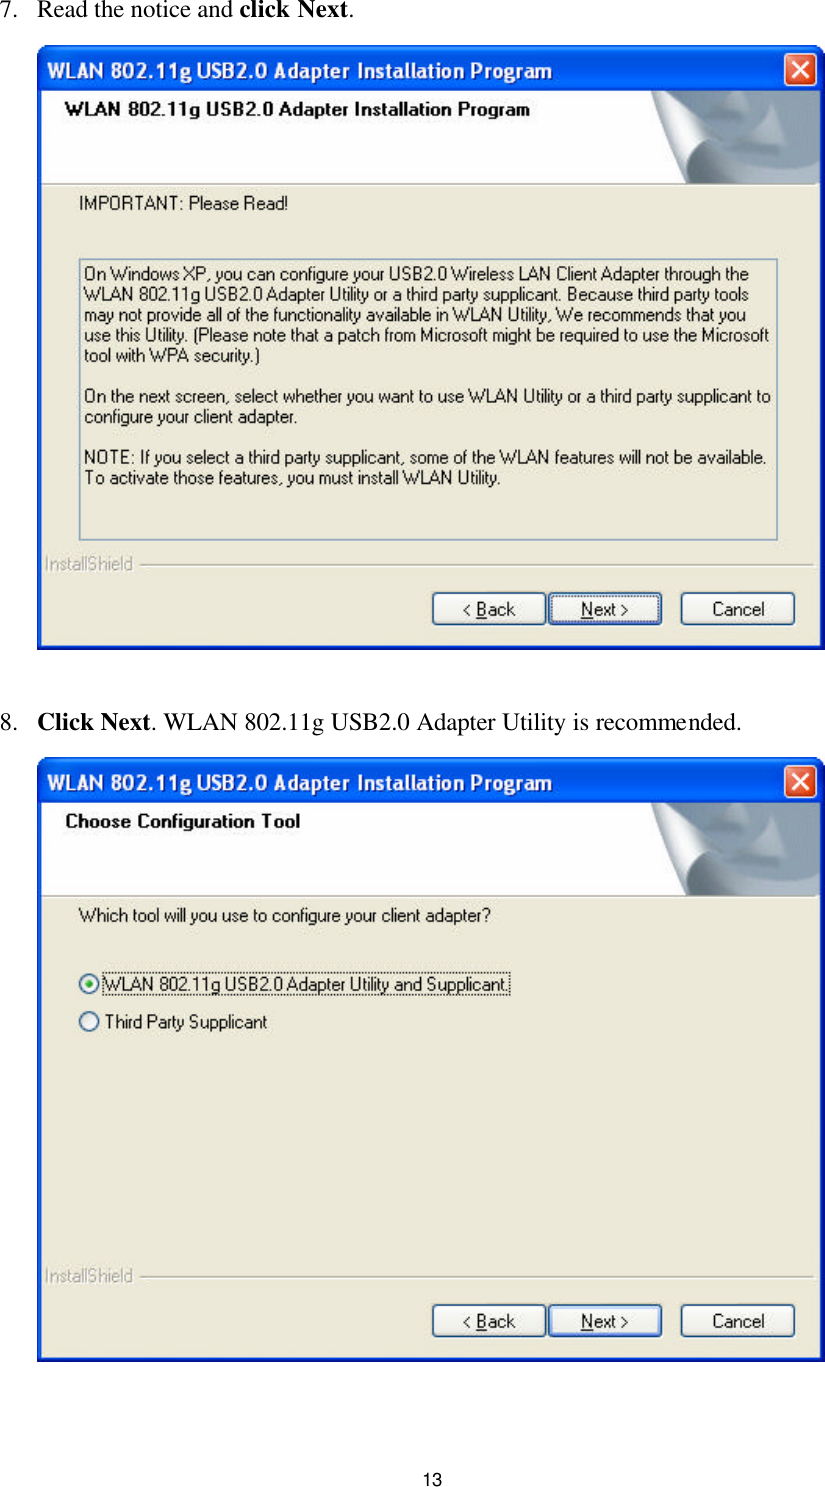  13 7. Read the notice and click Next.   8. Click Next. WLAN 802.11g USB2.0 Adapter Utility is recommended.   